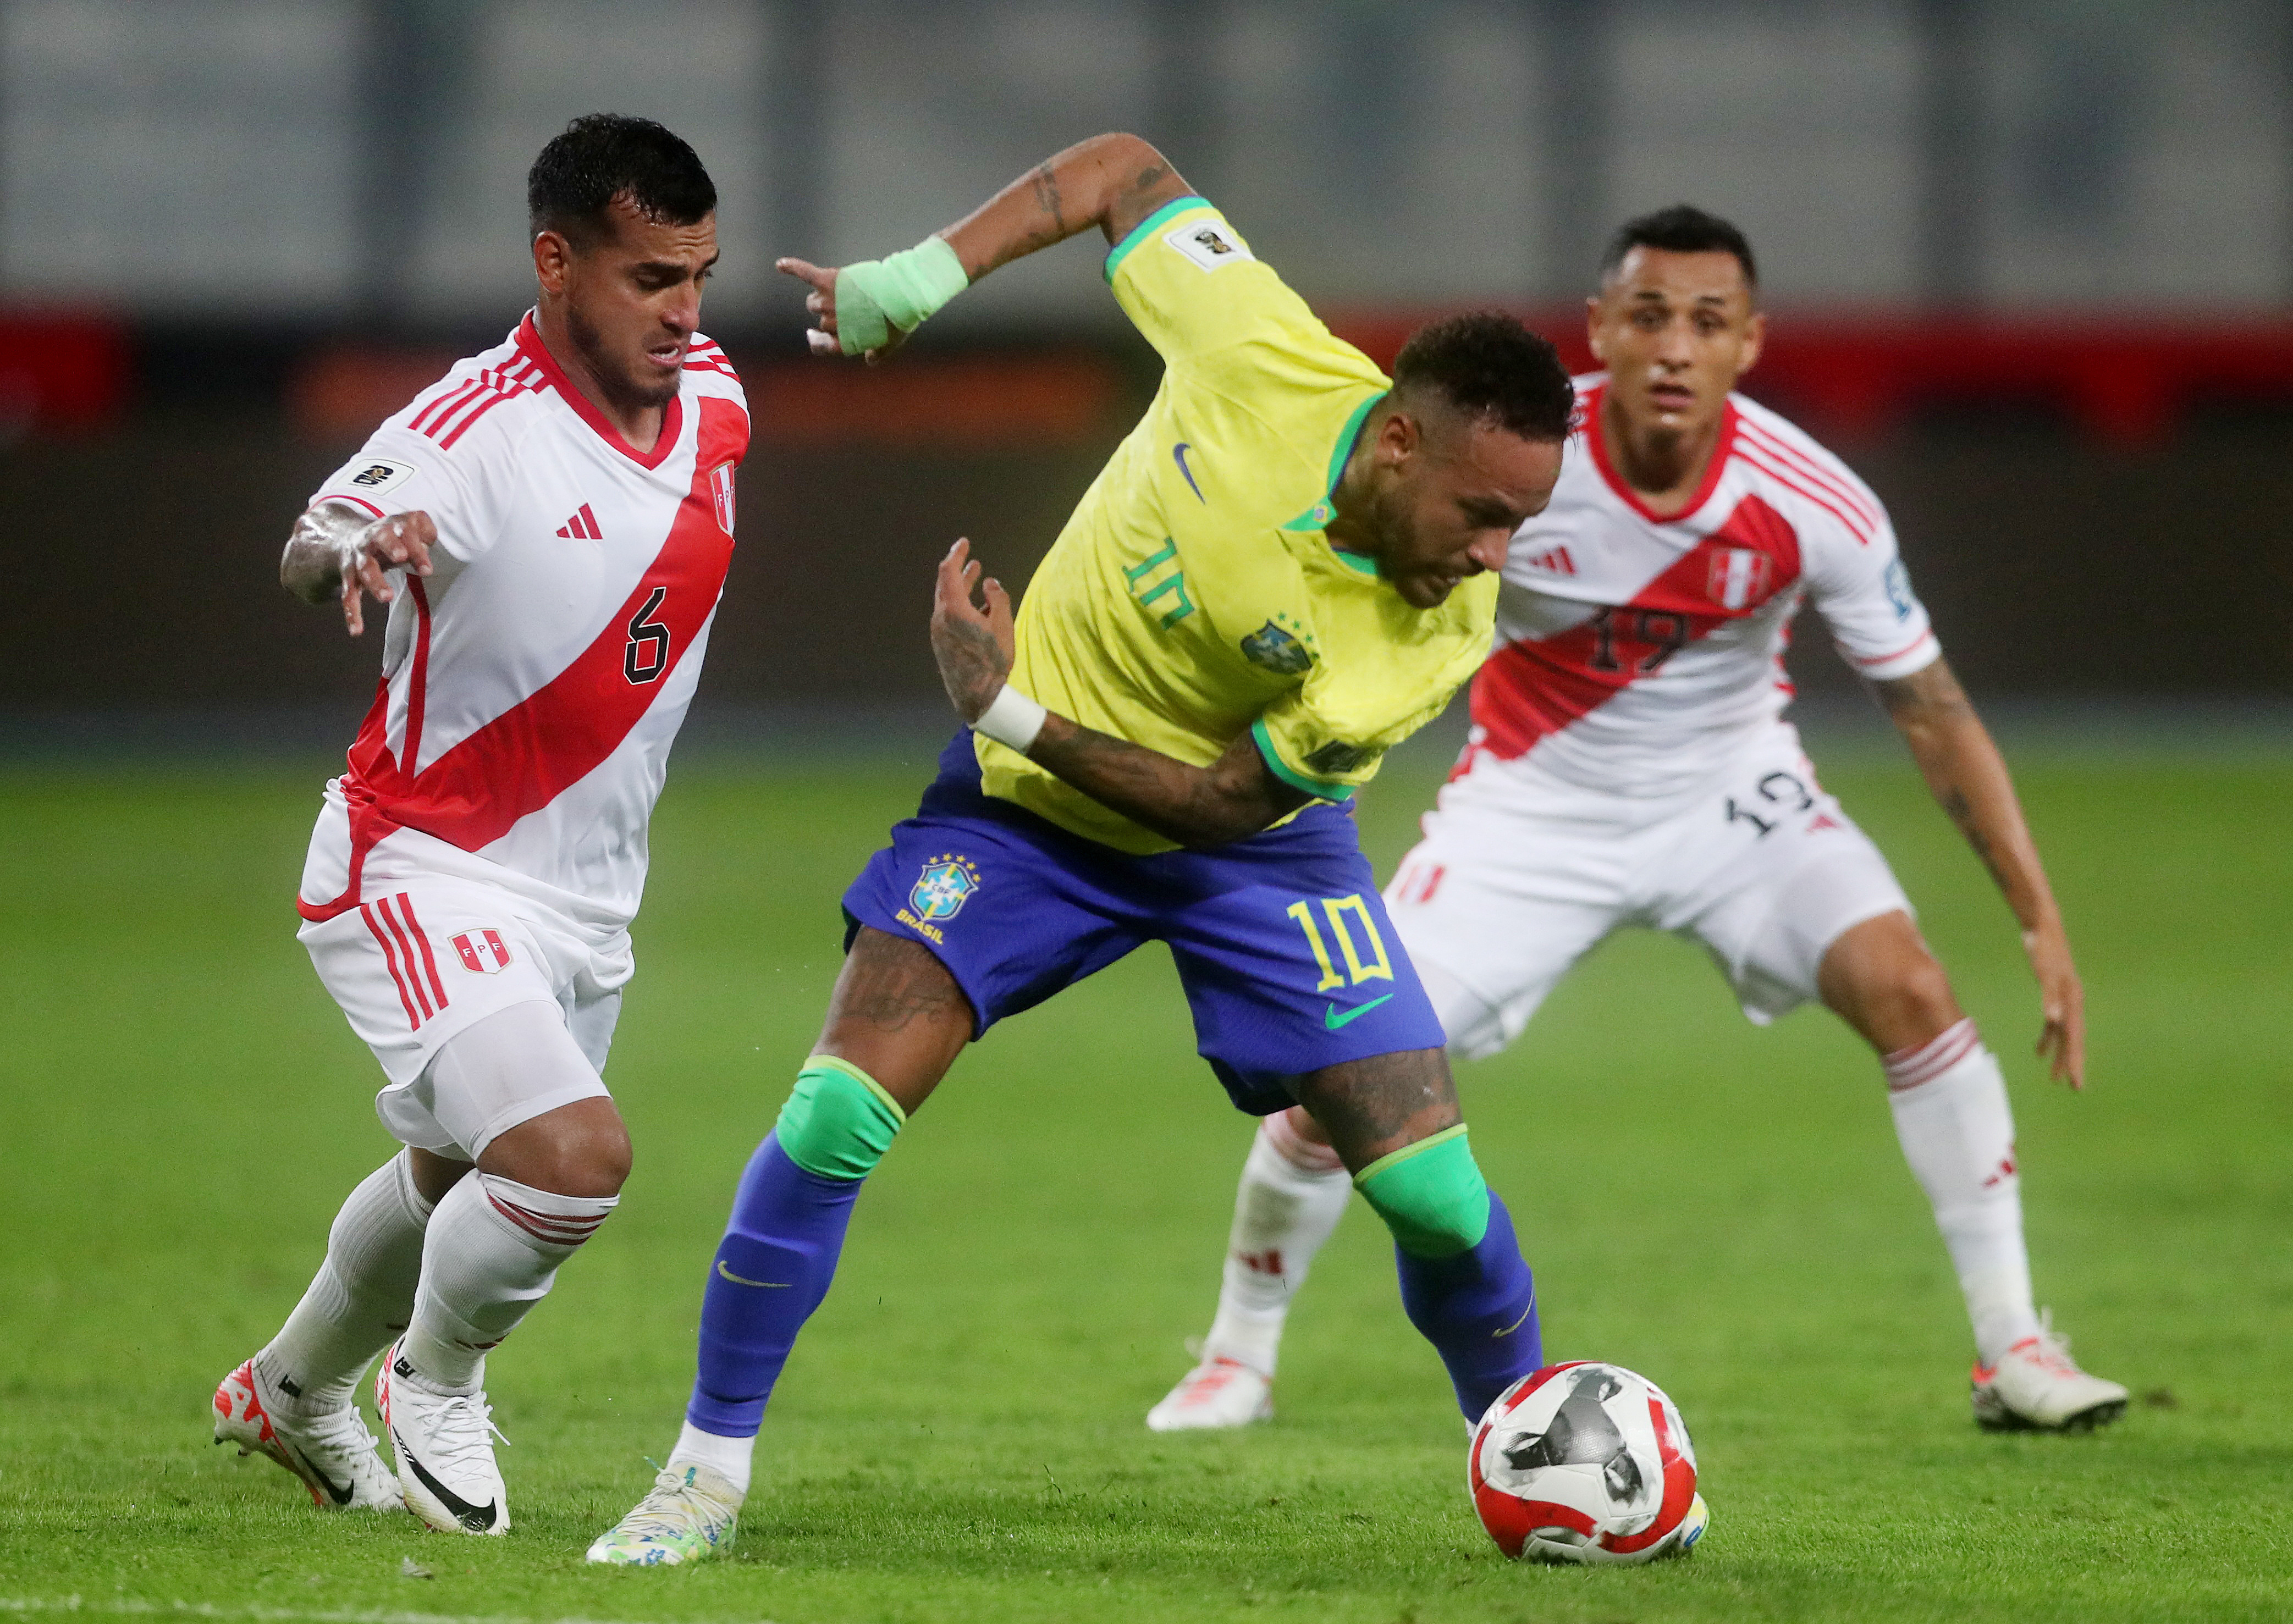 Peru 0-1 Brazil in South American Qualifiers for the 2026 World